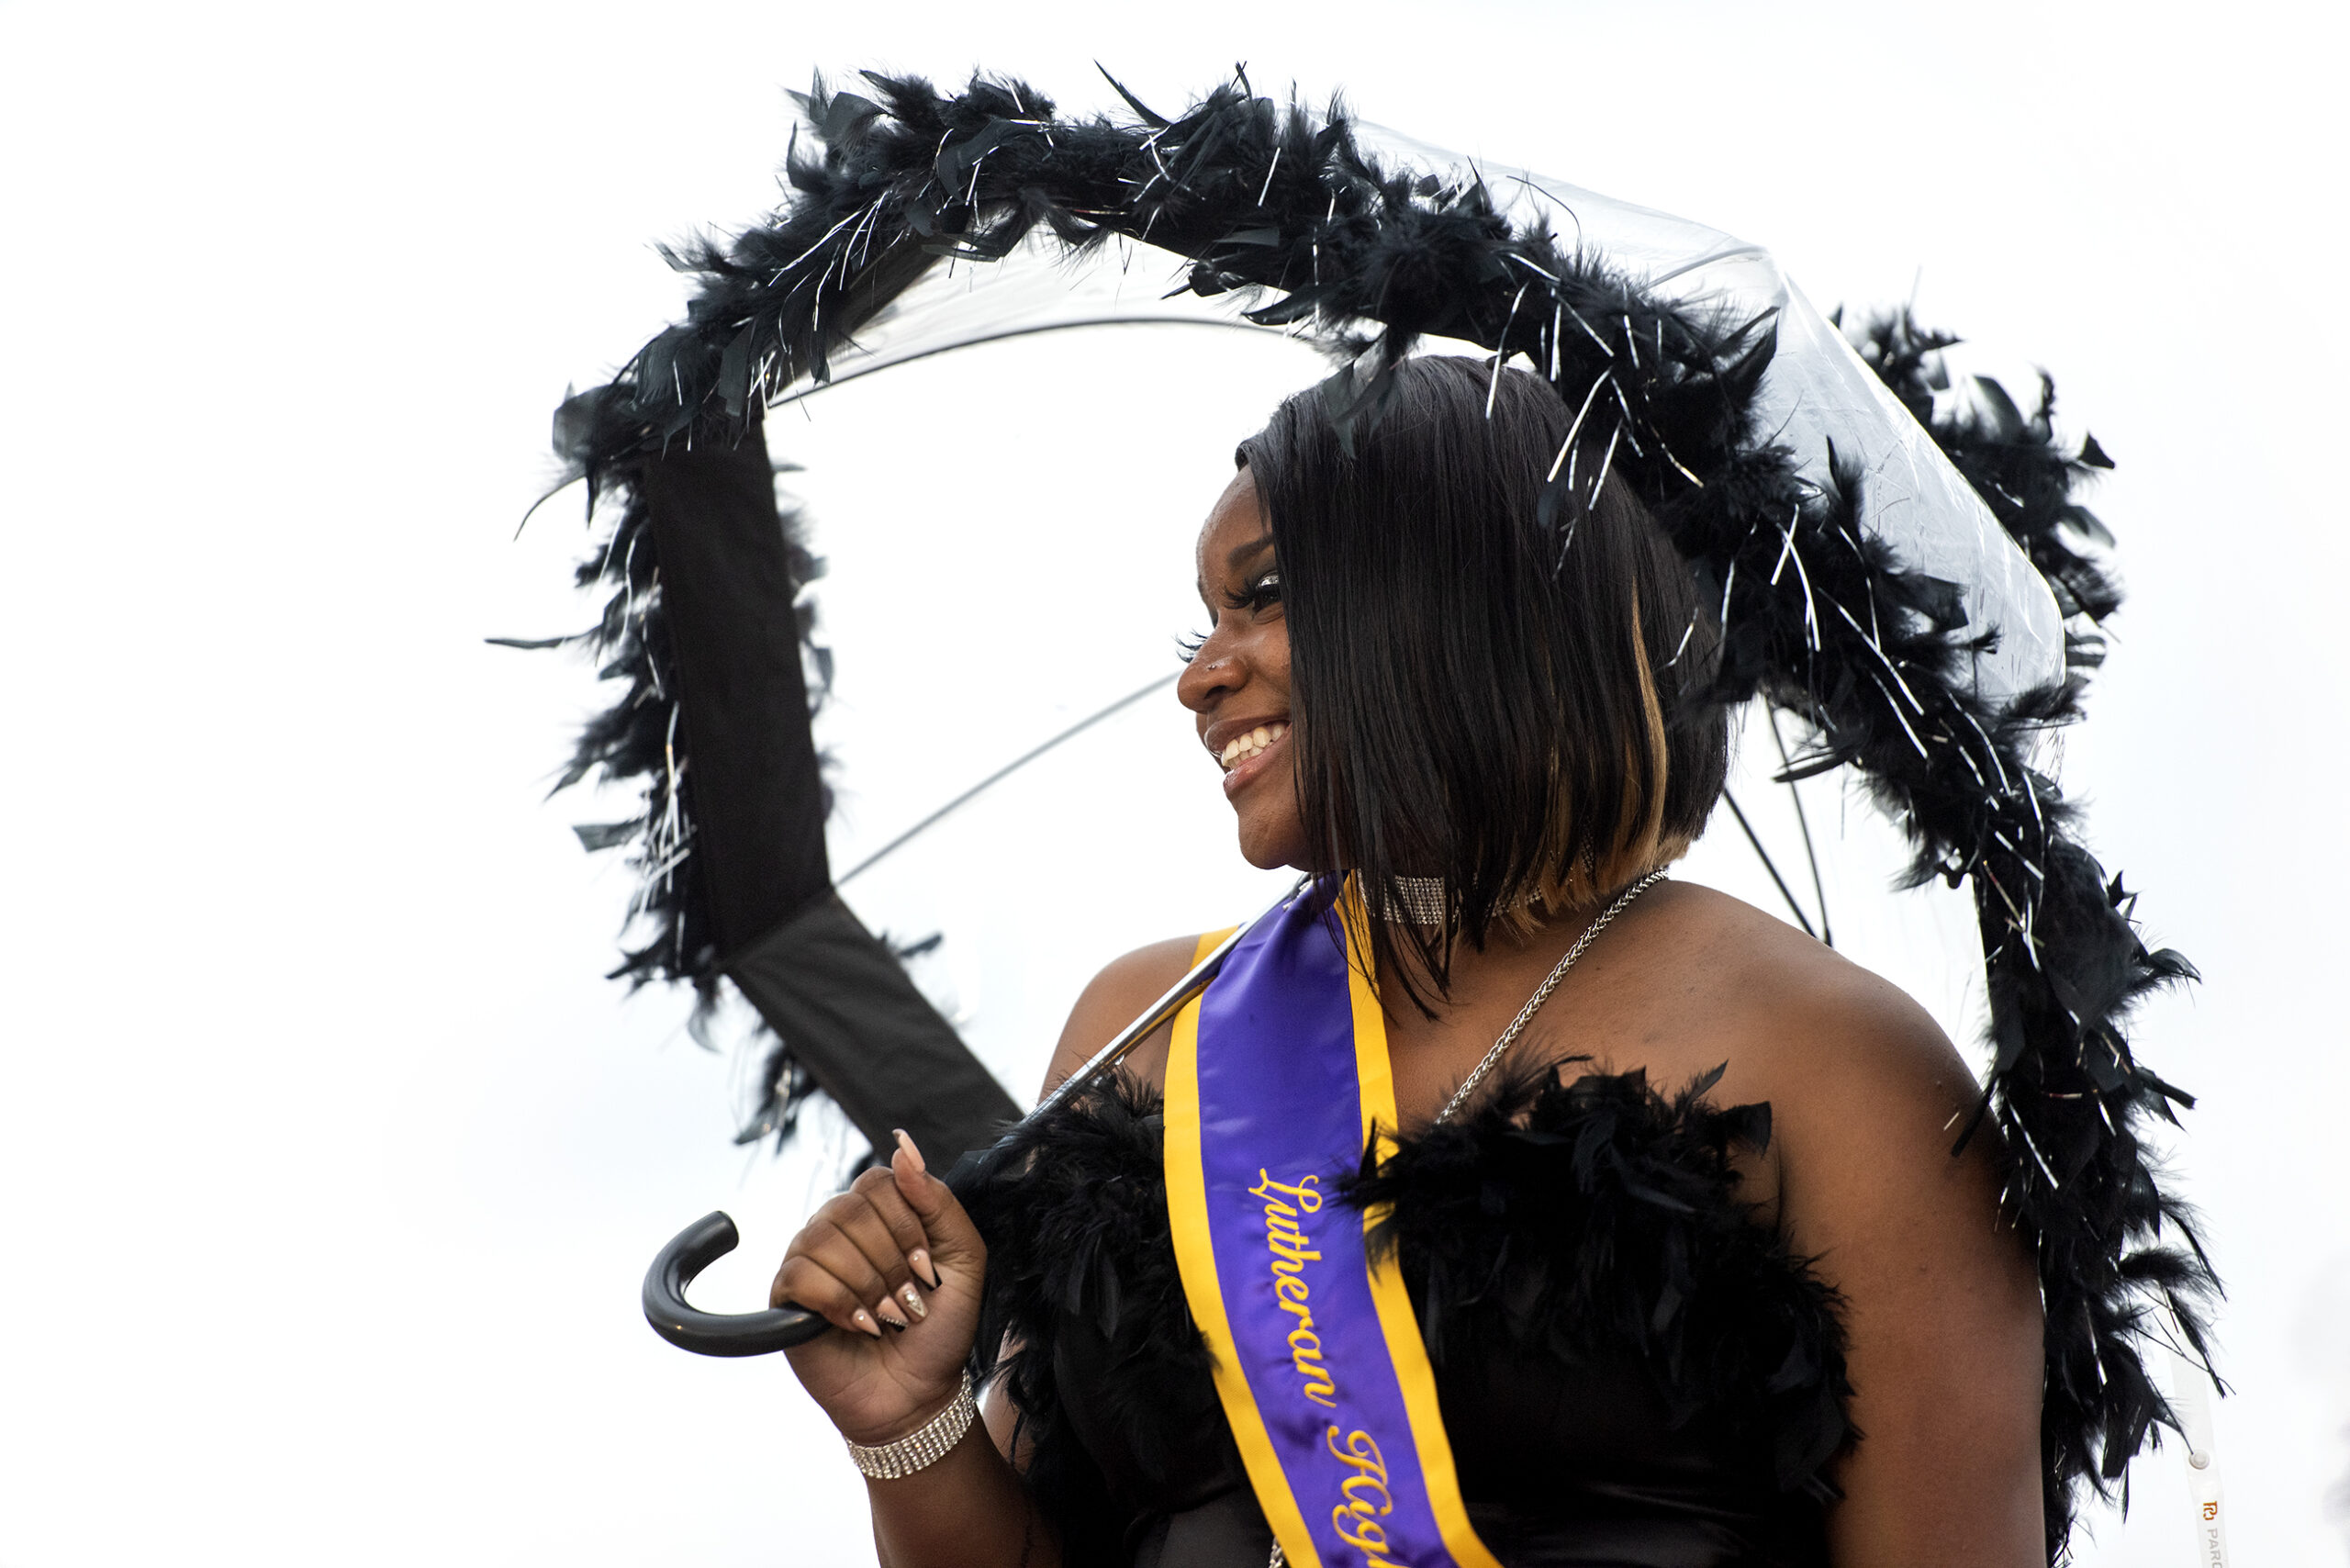 An attendee wears a black dress and holds a matching parasol as she smiles for a photo.